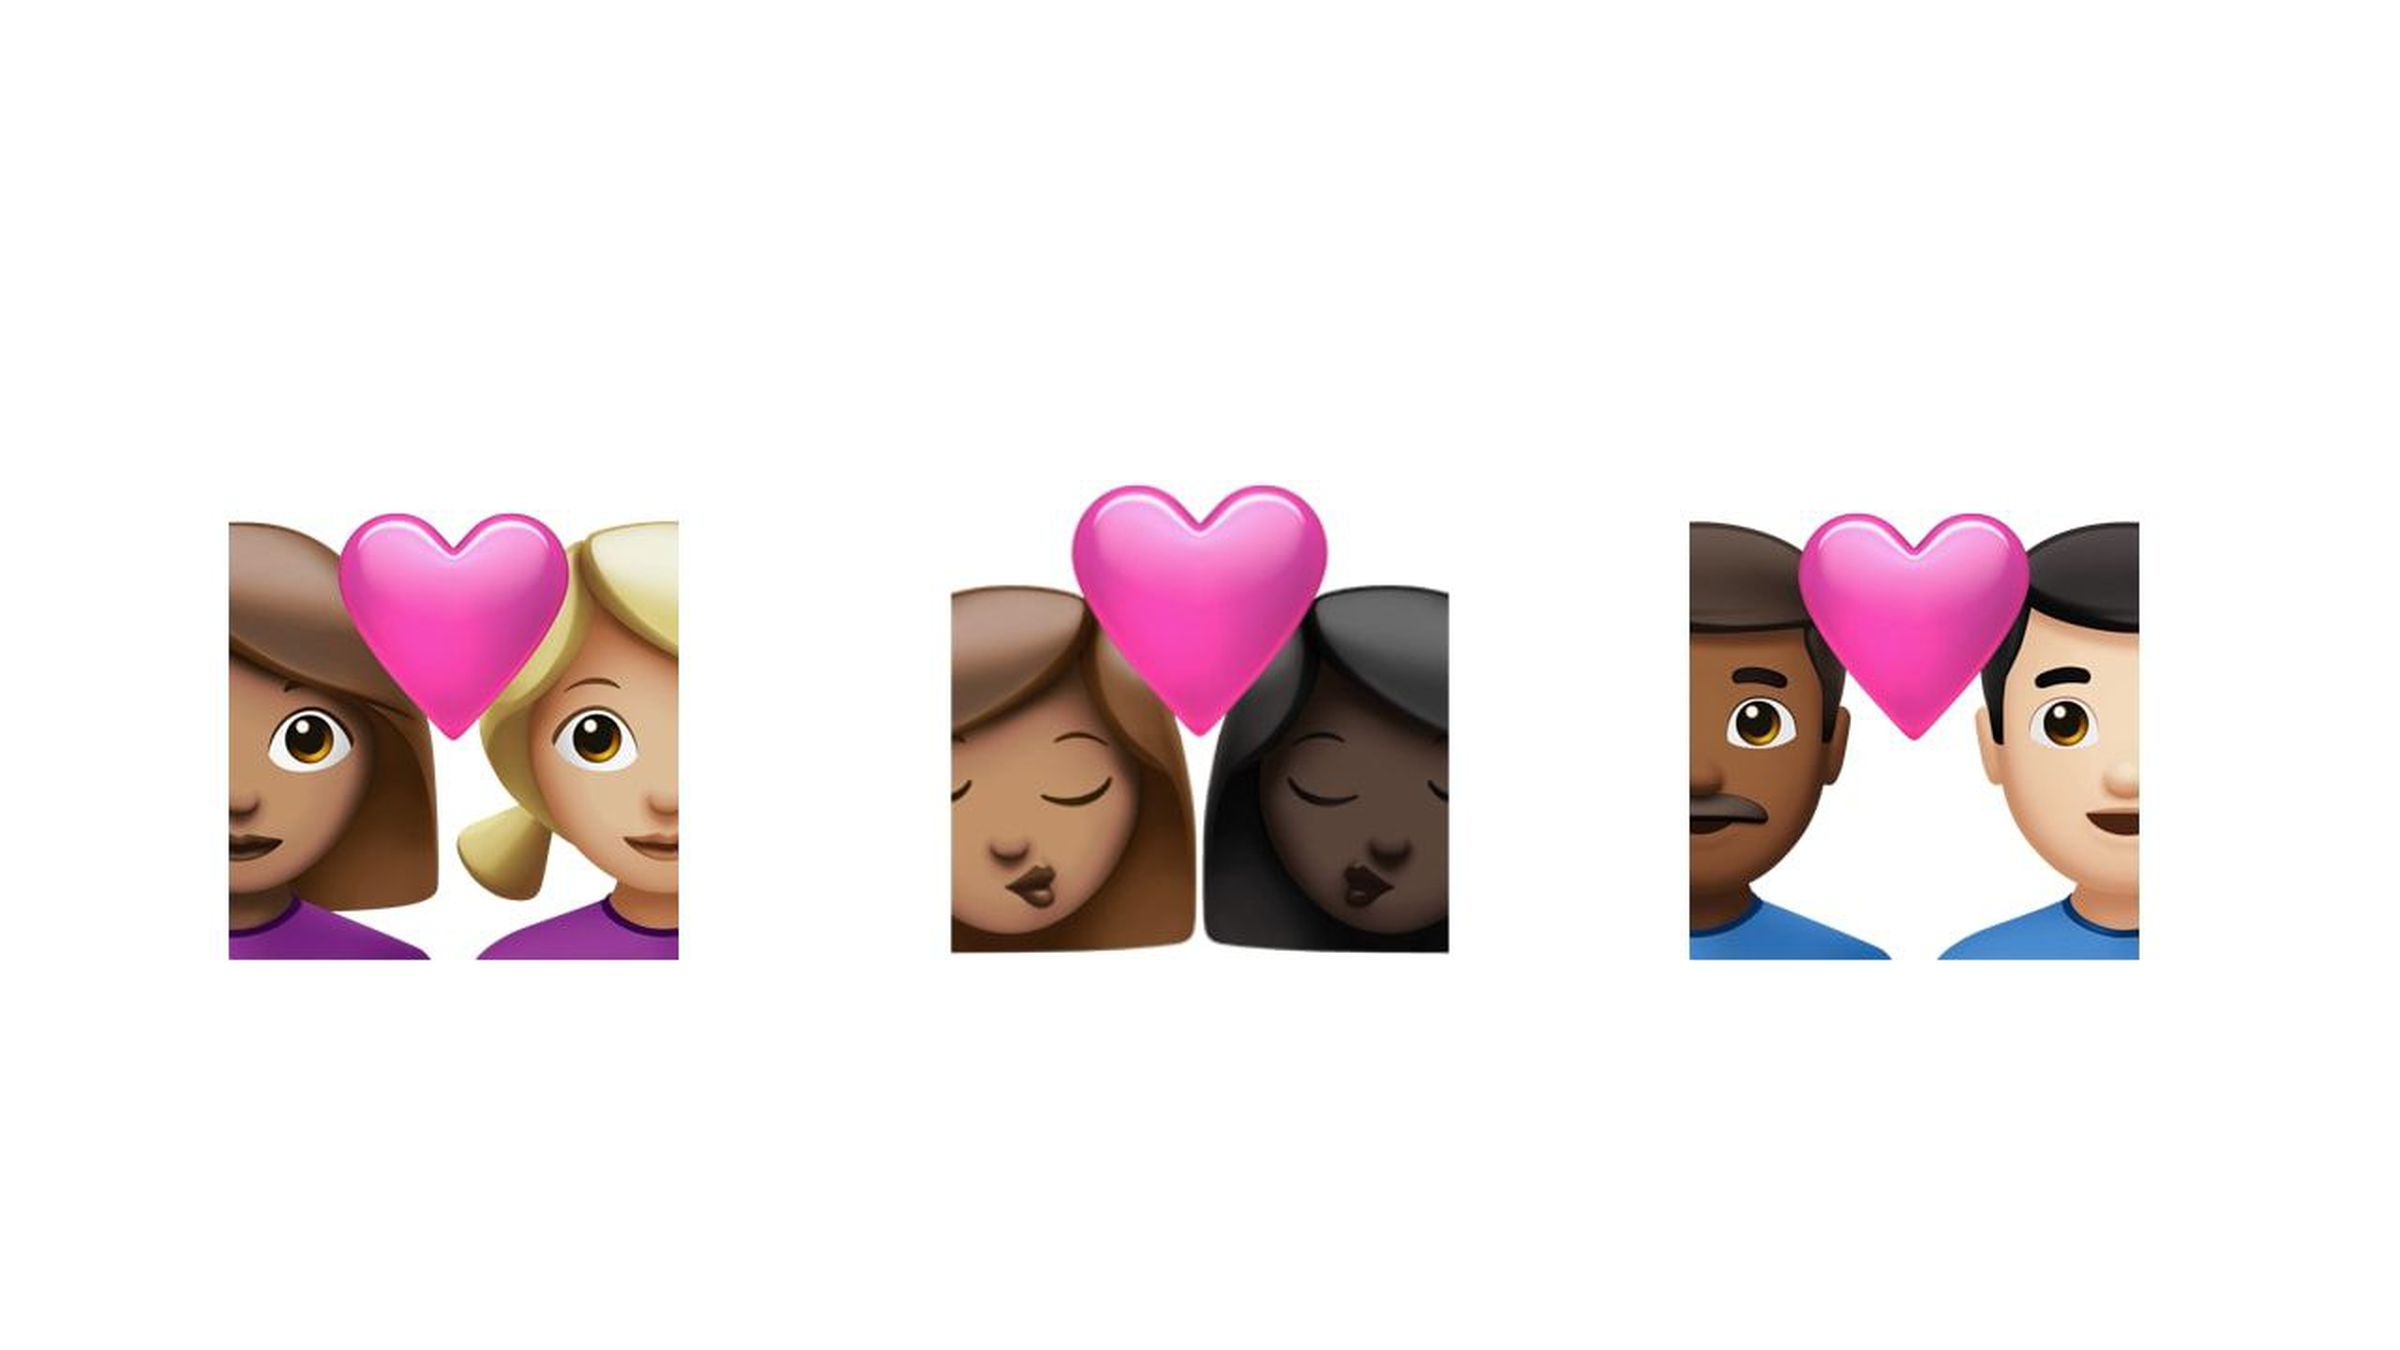 Skin tone variations for the “Couples with Heart” emoji in iOS 14.5.